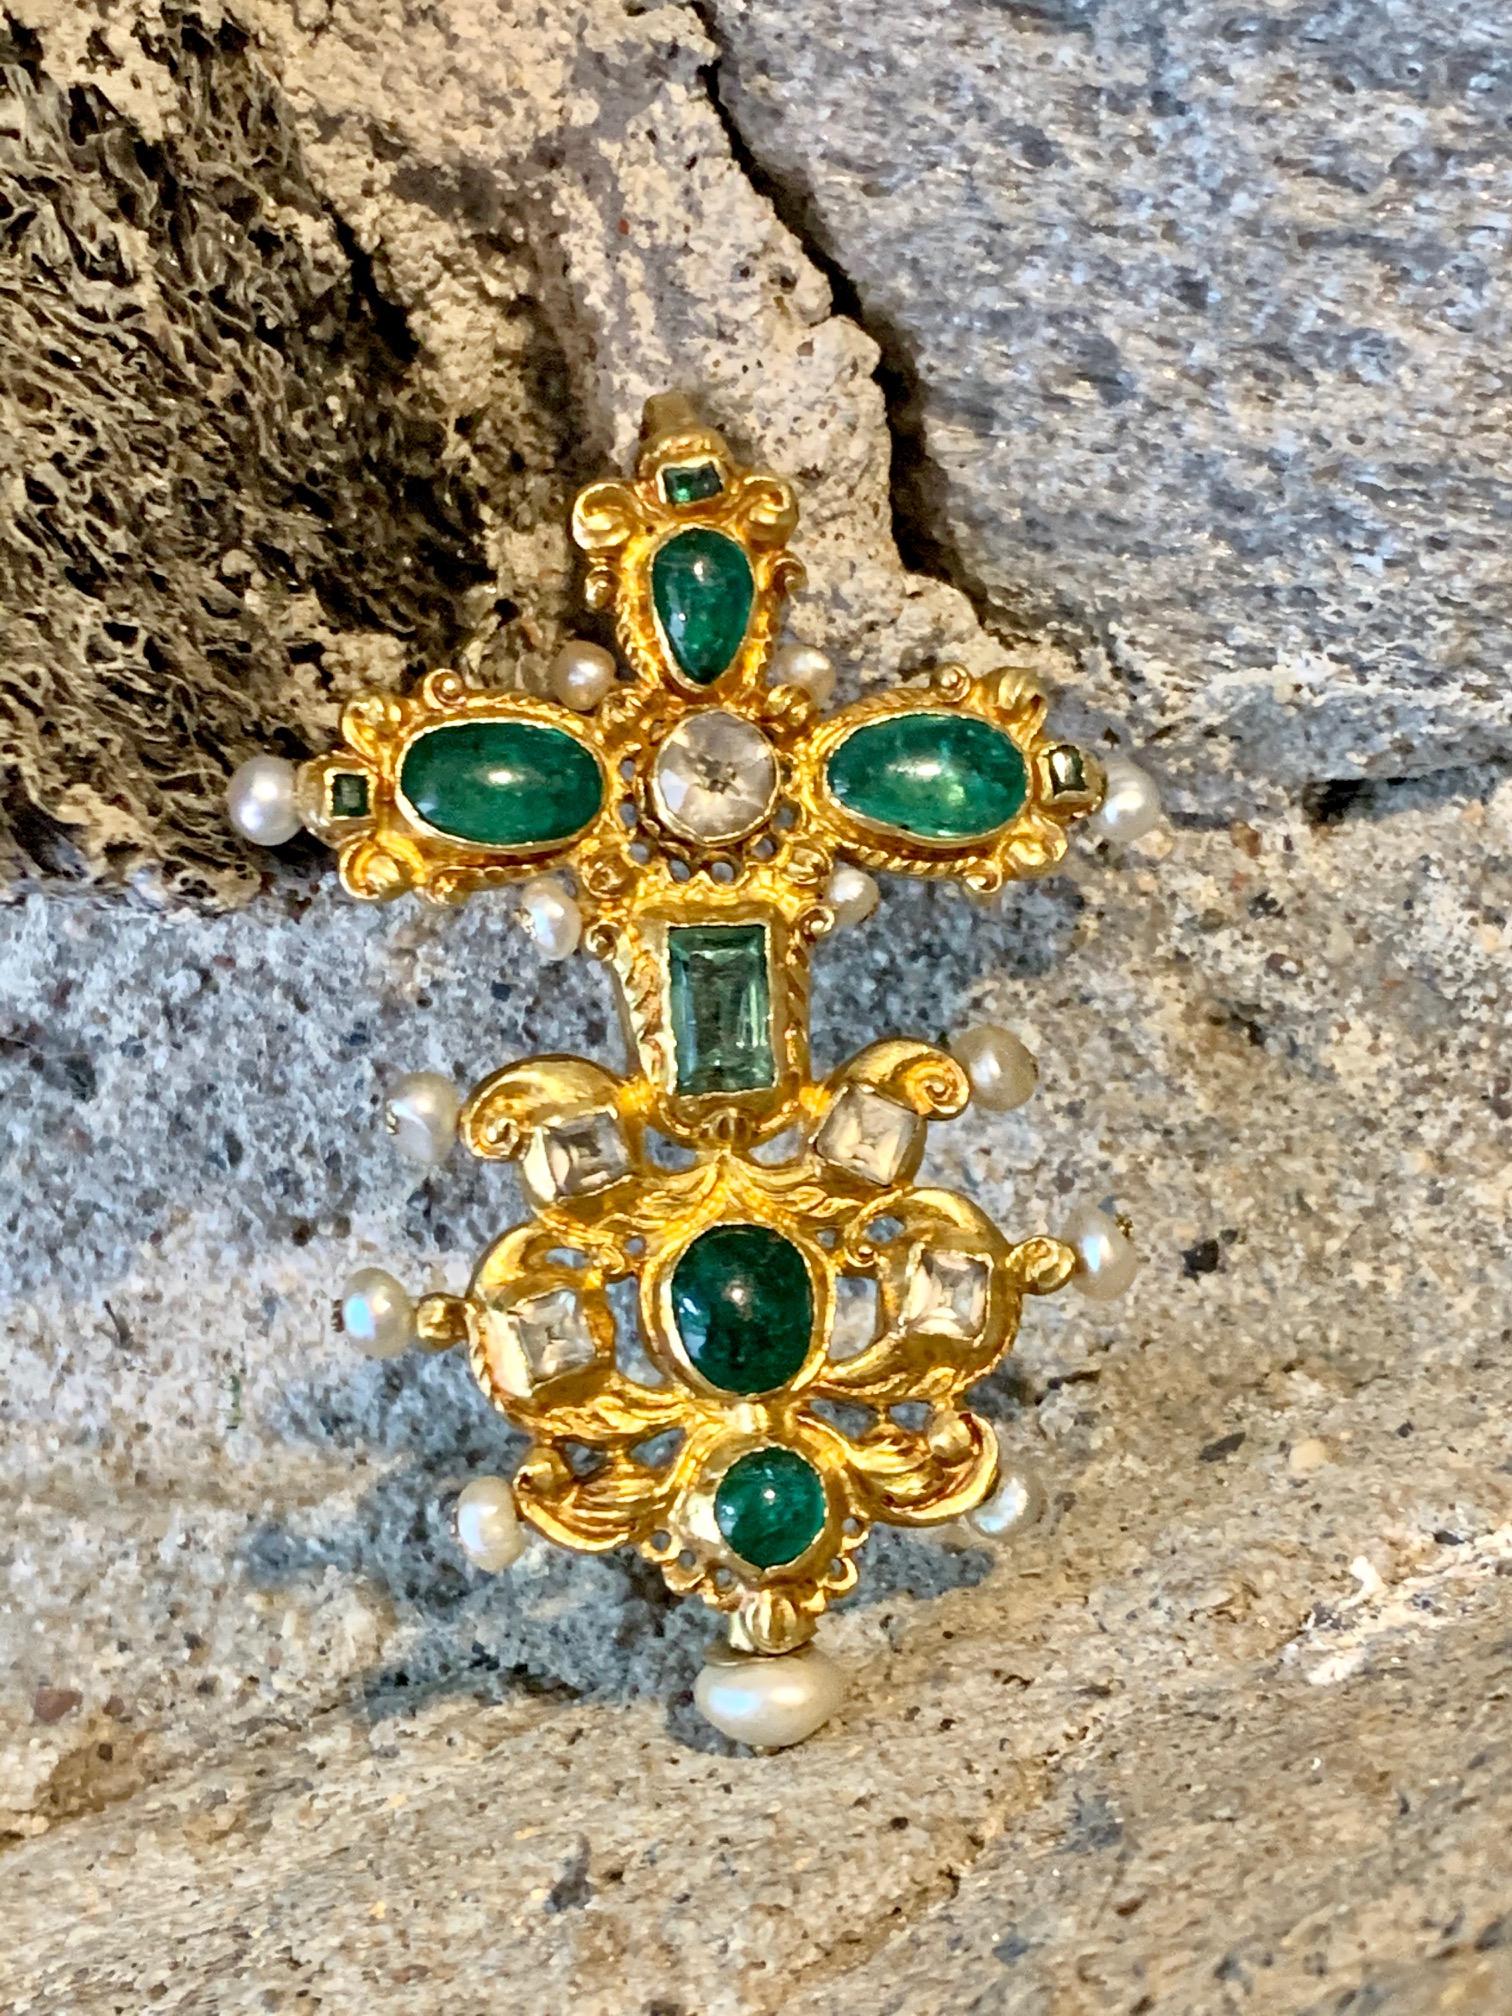 This antique 22 karat yellow gold pendant features Emeralds of various cuts, along with Pearls and white unidentified gemstones. 
It is stamped 